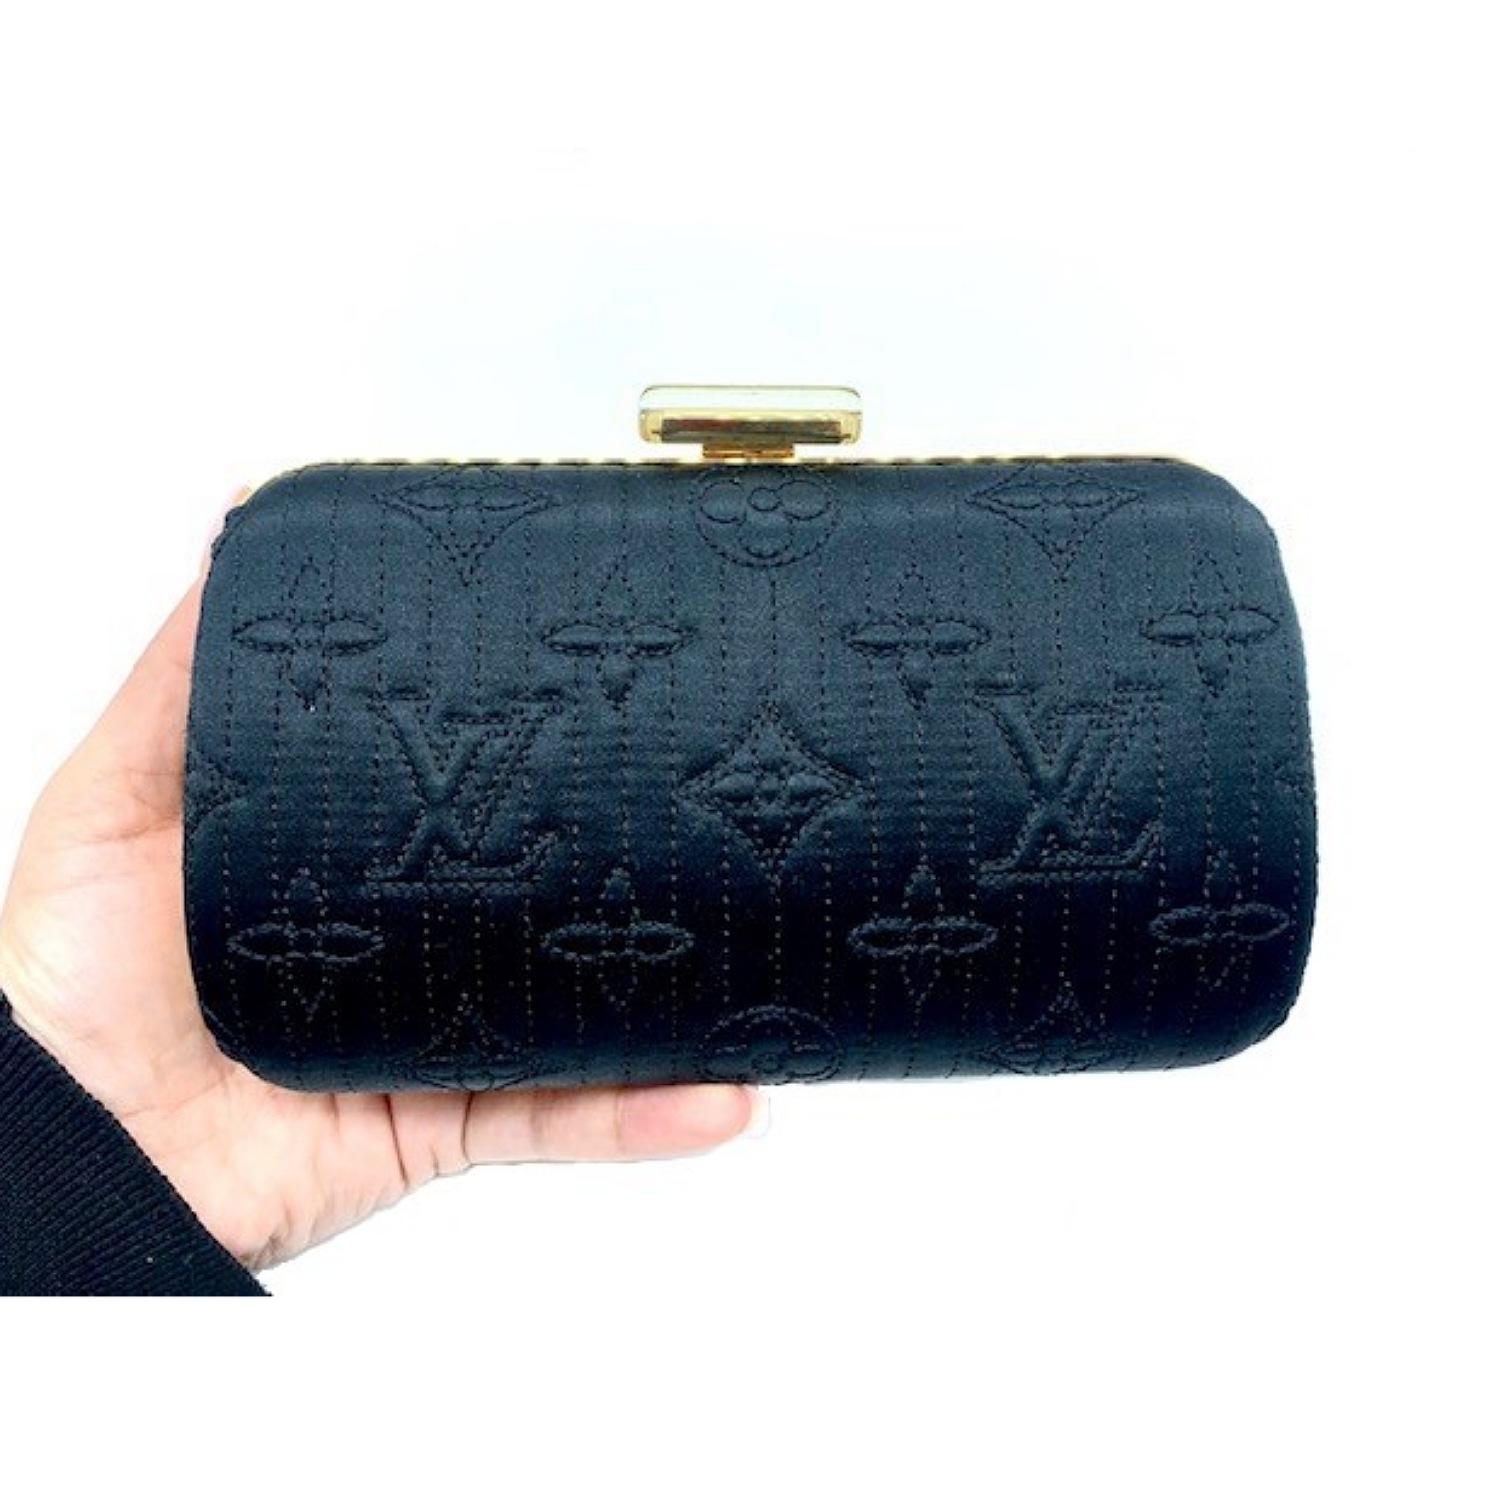 Louis Vuitton Noir Monogram Minaudiere Motard Clutch Bag is a limited edition stunning evening bag for any classy event. It features LV monogram quilted satin in black with a gold chain shoulder strap. Wear it over your shoulder or as a clutch. Open